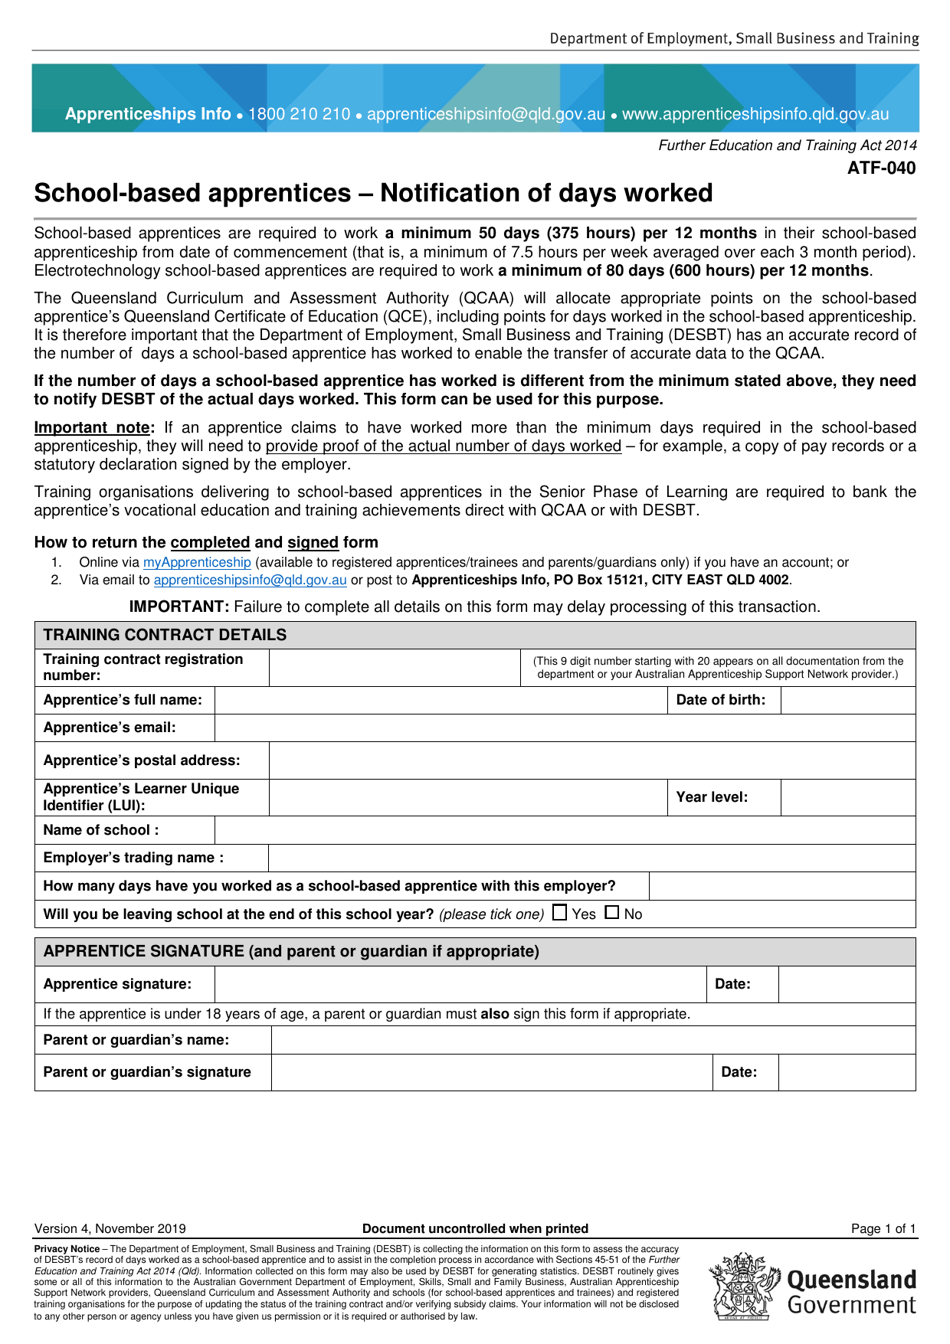 Form ATF-040 School-Based Apprentices - Notification of Days Worked - Queensland, Australia, Page 1